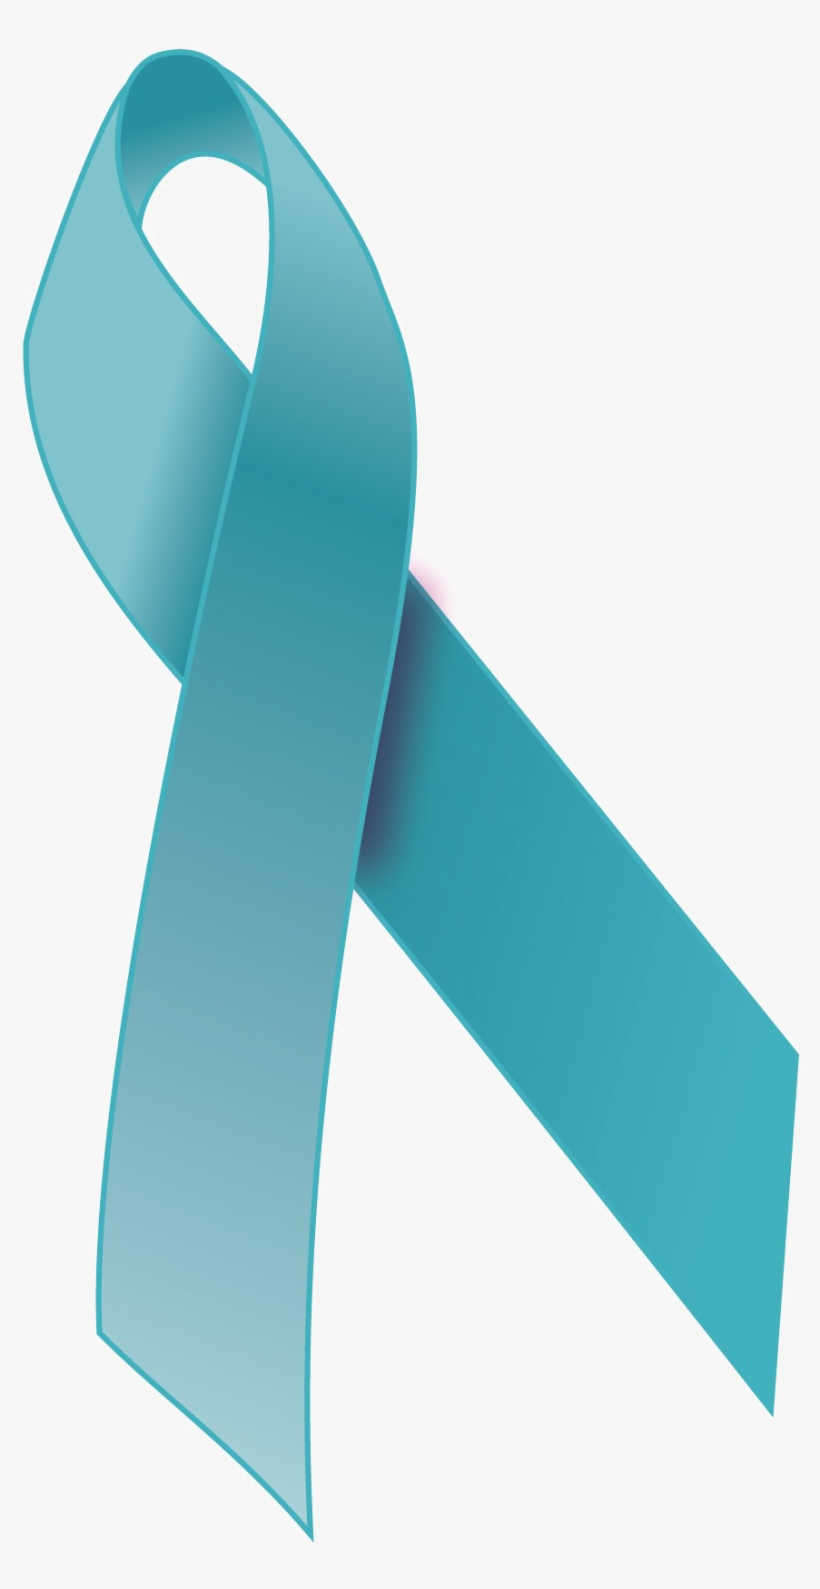 Turquoise Ribbon Png Download Image - Ovarian Cancer Ribbon Png, transparent png #3682778